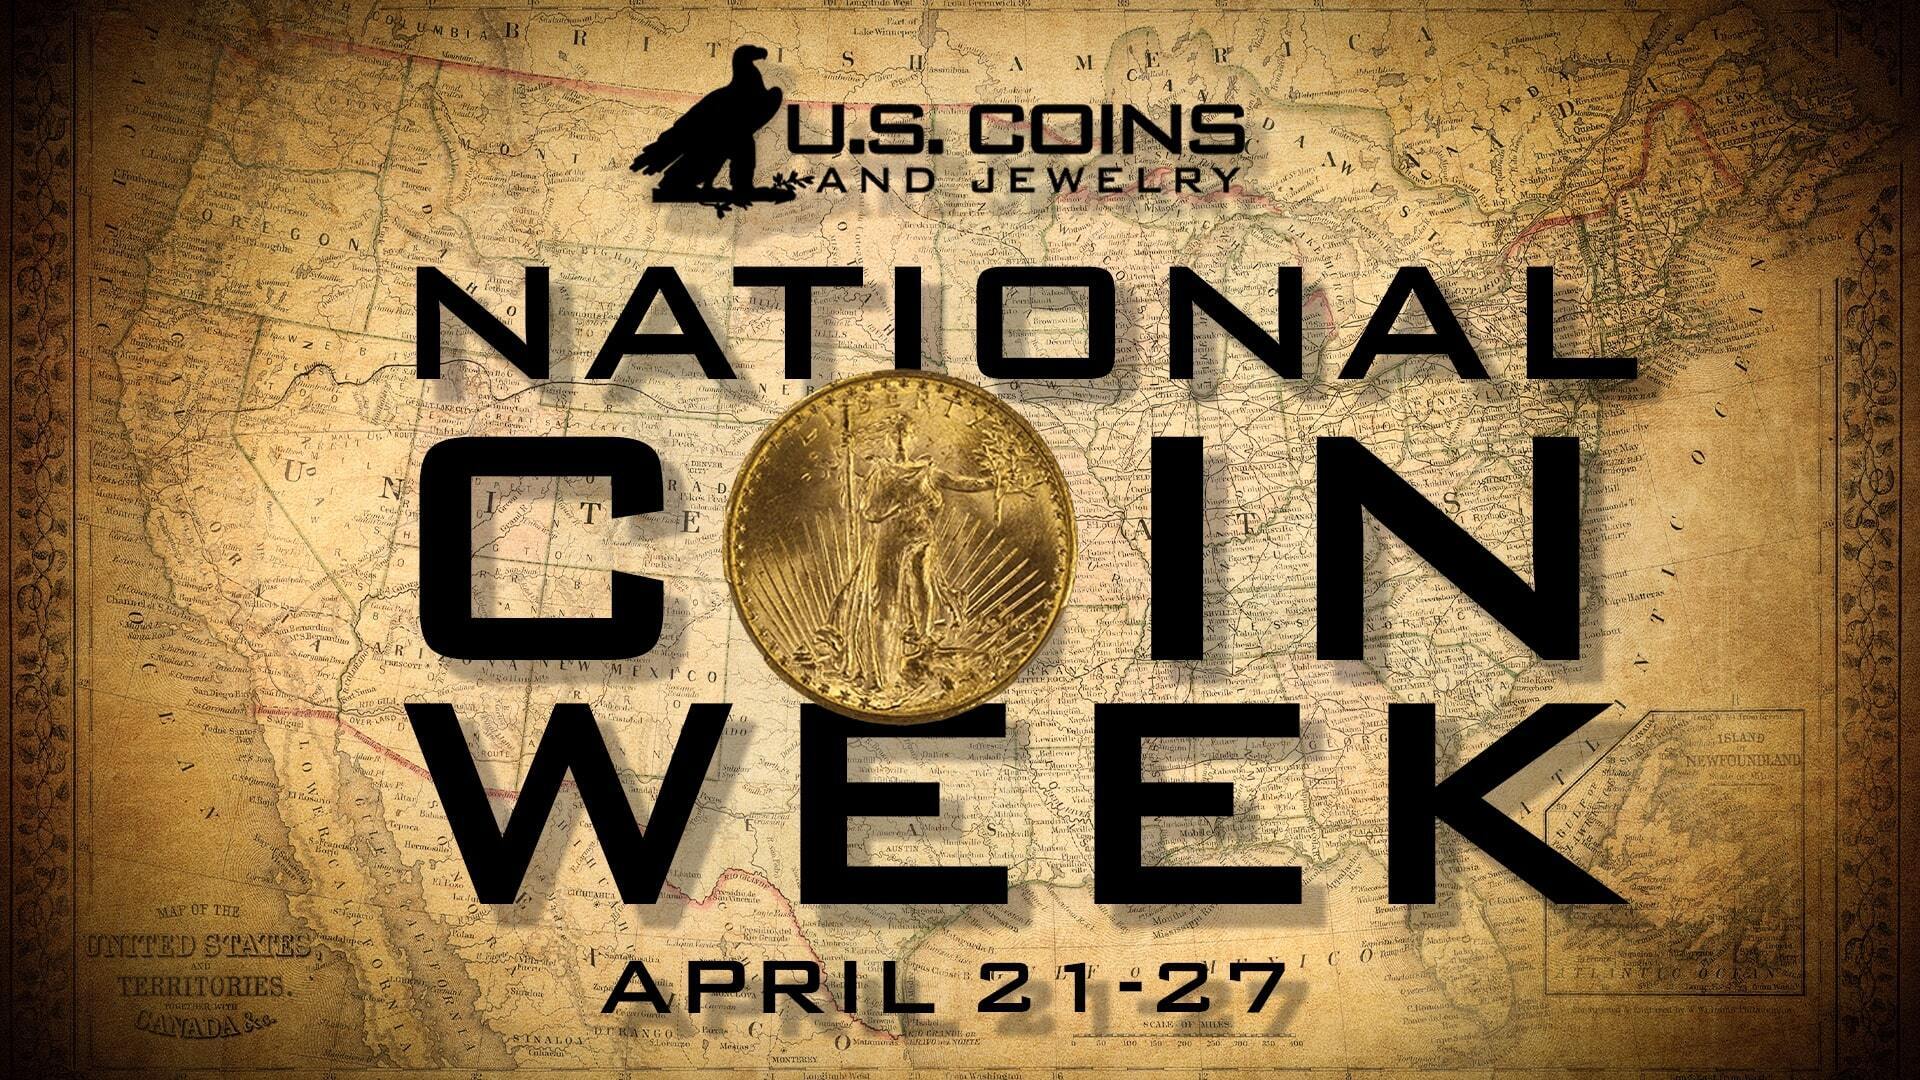 U.S Coins and Jewelry celebrates centennial National Coin week with treasure hunt